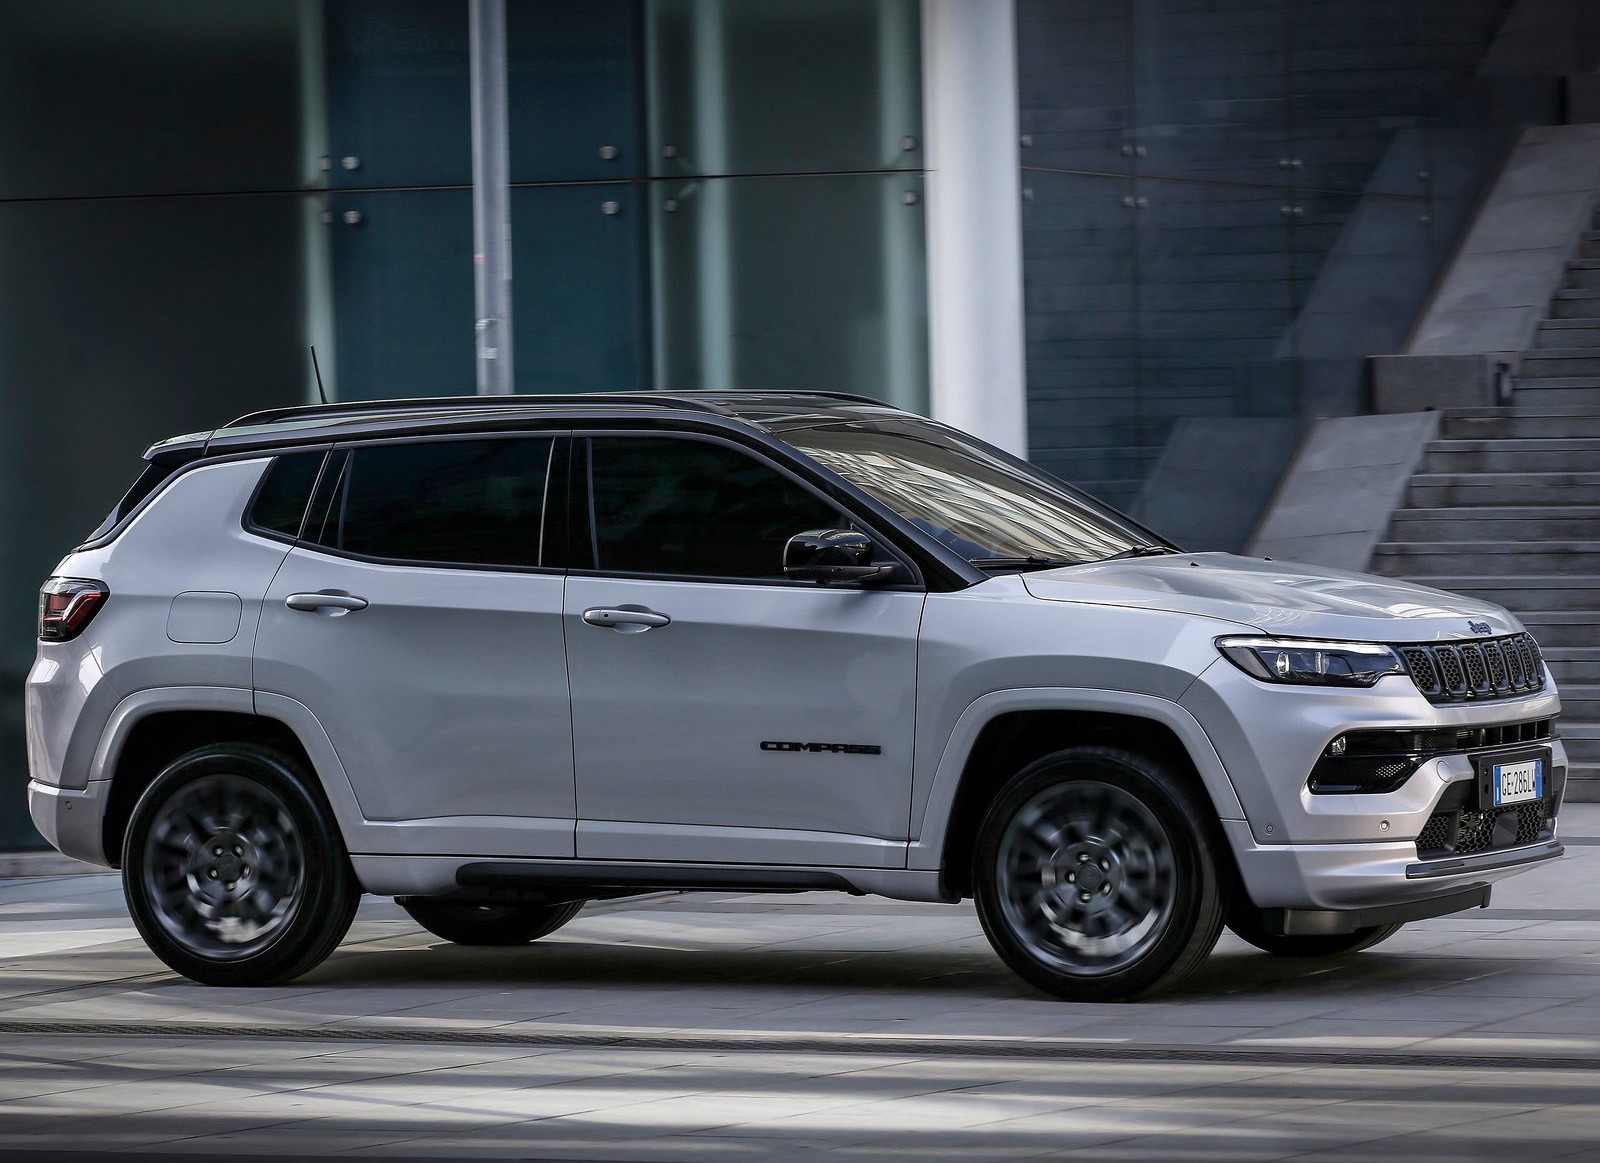 2022 Jeep Compass: Is This the Coolest Shape of a Gadget-Era Jeep So Far? -  autoevolution